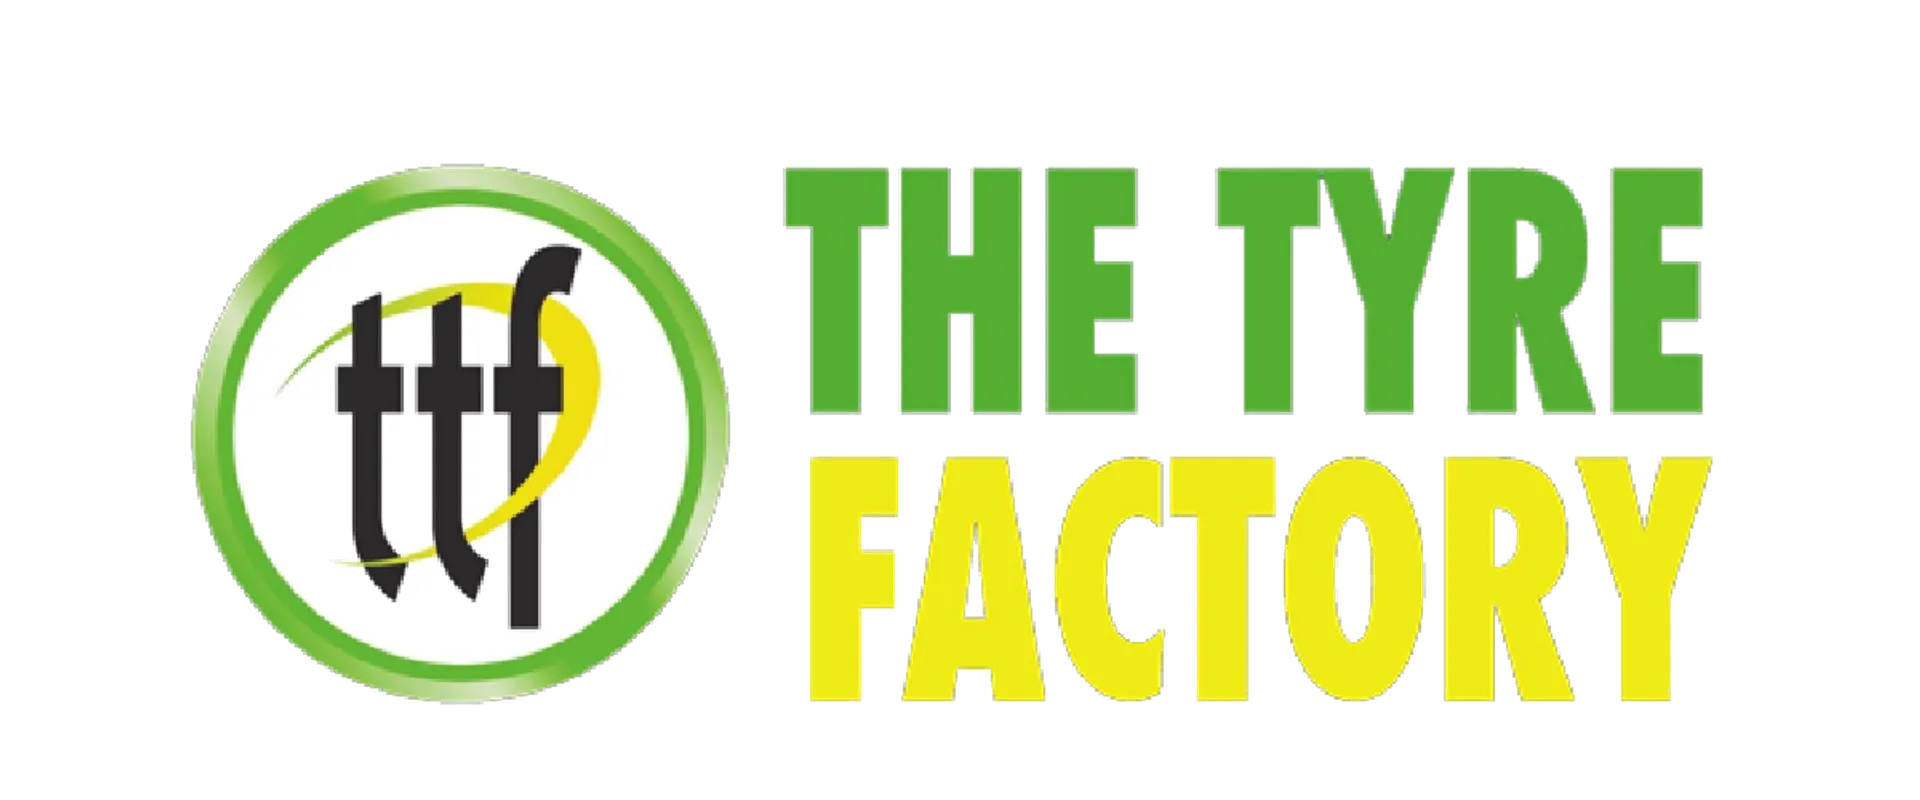 THE TYRE FACTORY logo of current flyer